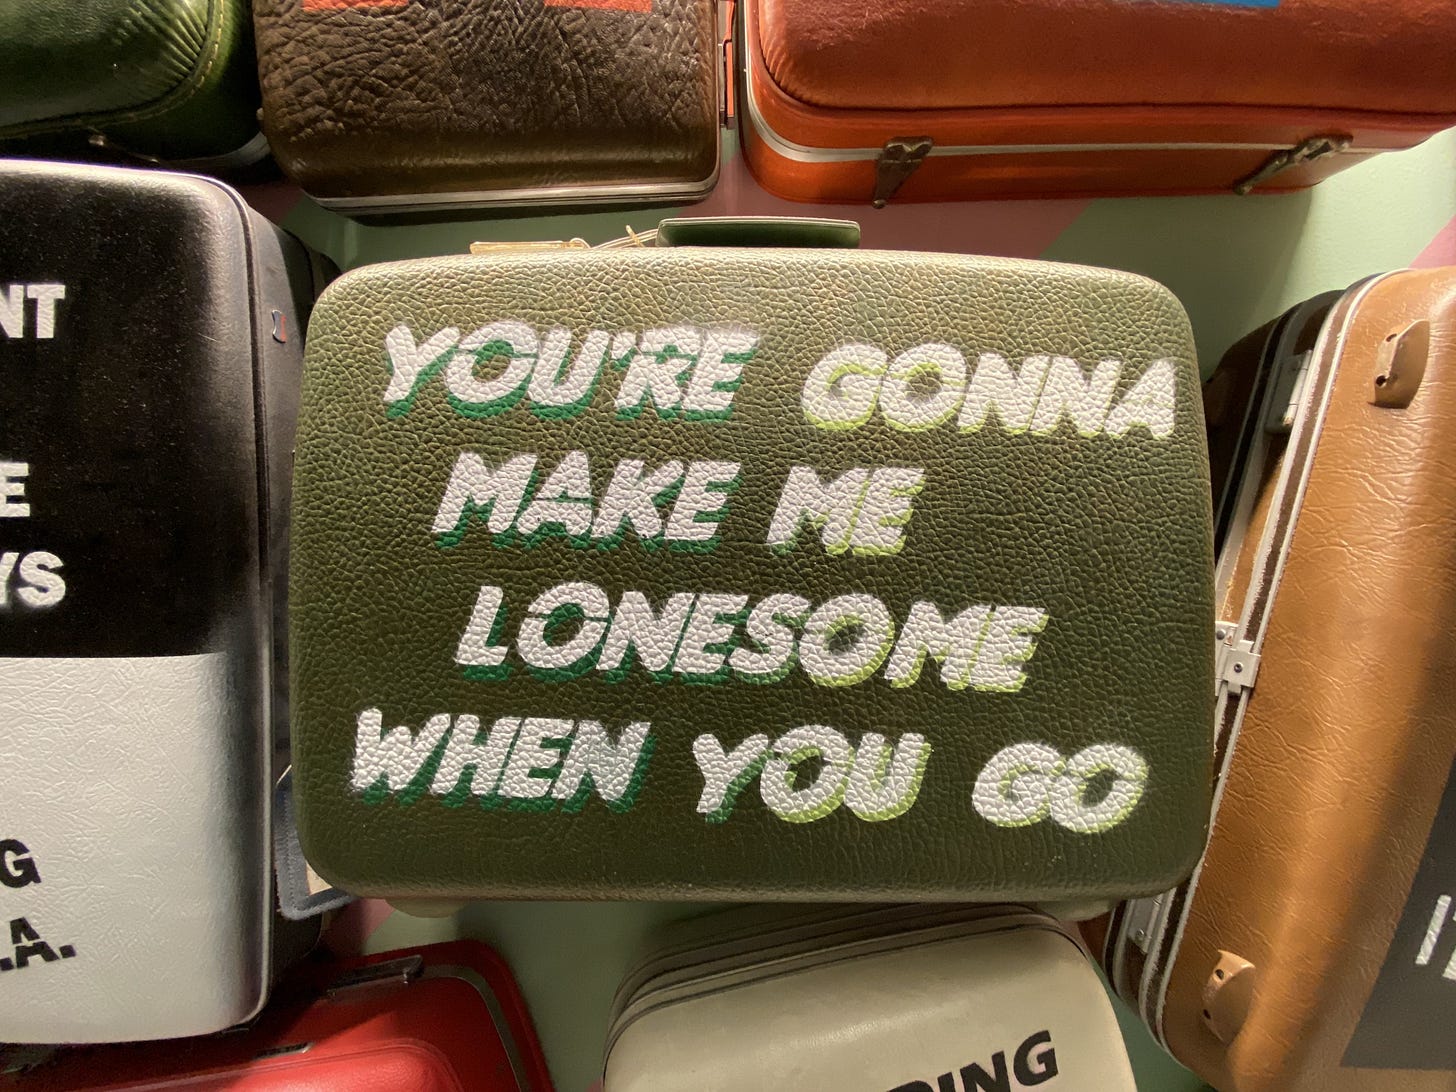 A vintage suitcase (tucked in a pile) reads, “You’re gonna make me lonesome when you go.”